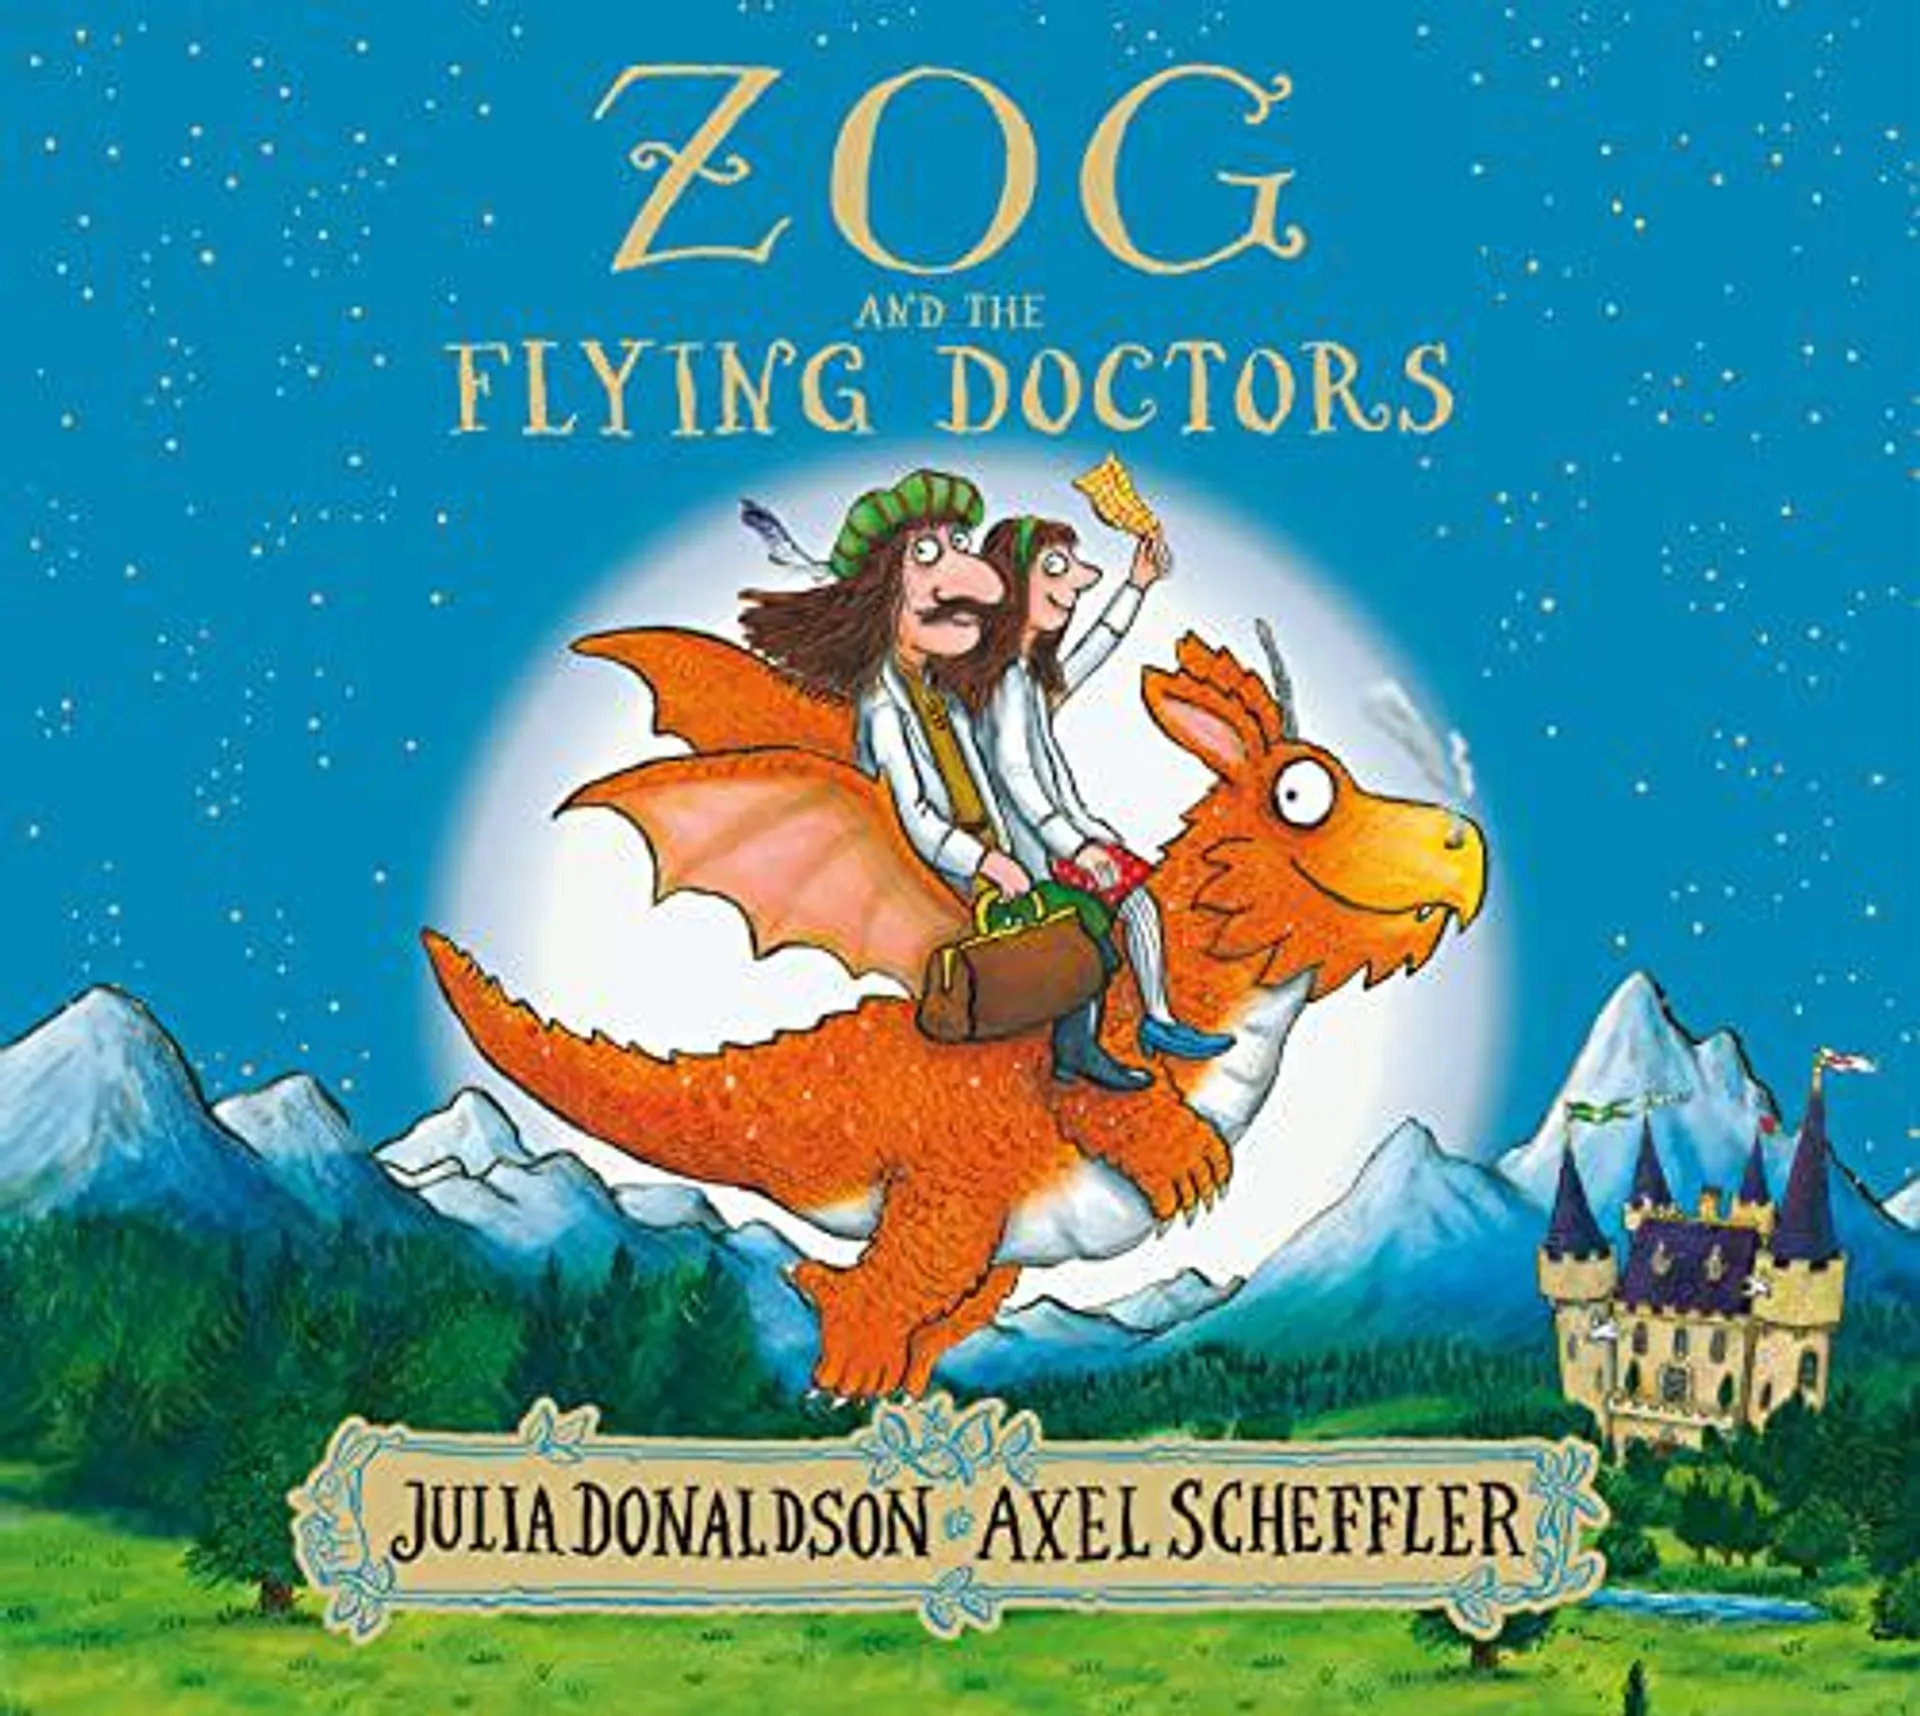 Zog and the Flying Doctors by Julia Donaldson